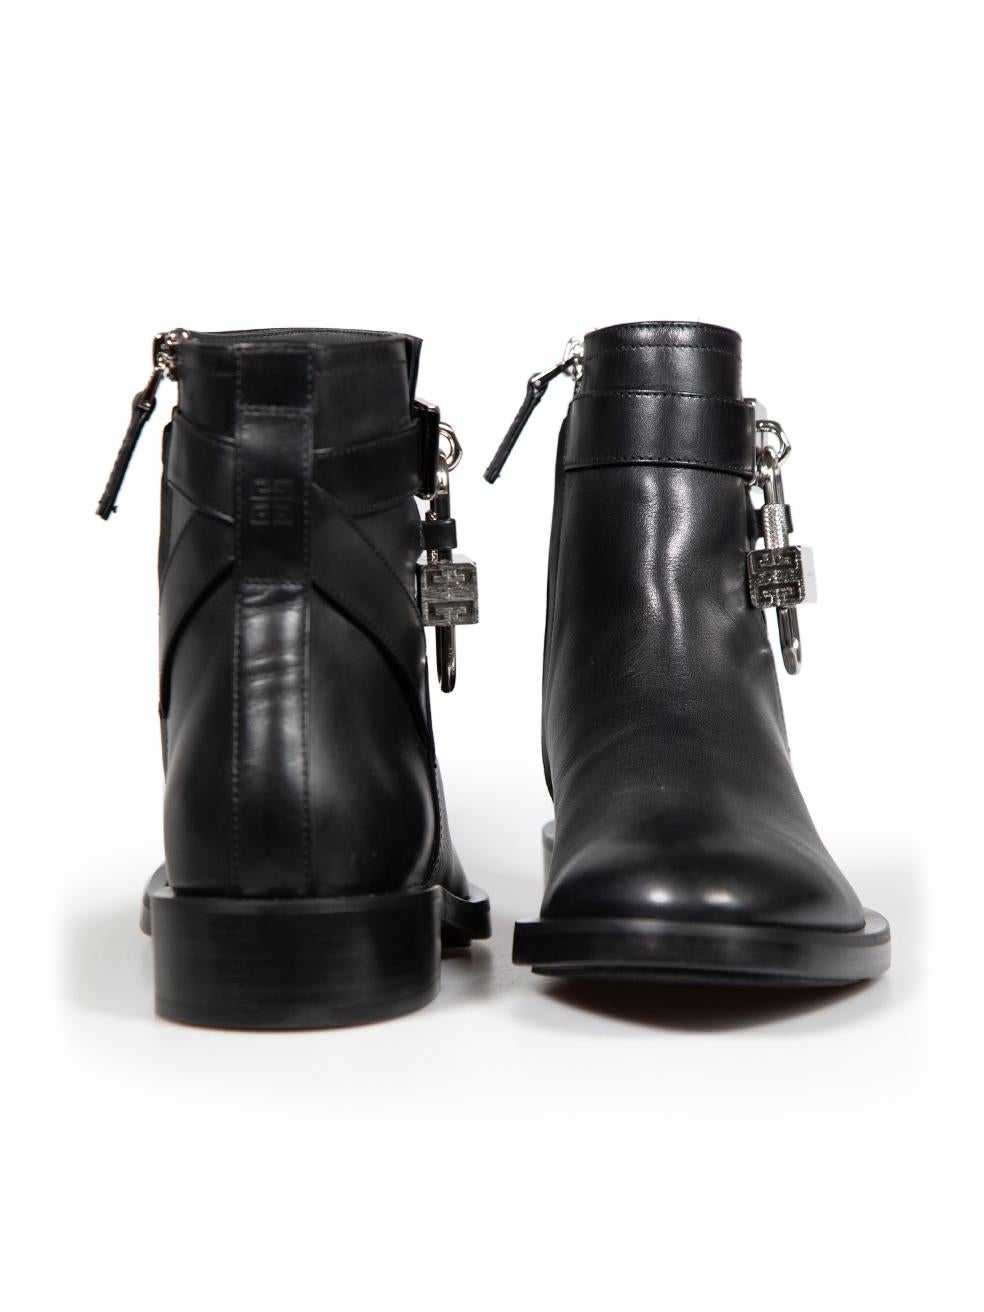 Givenchy Black Leather Lock Ankle Boots Size IT 36.5 In Excellent Condition For Sale In London, GB